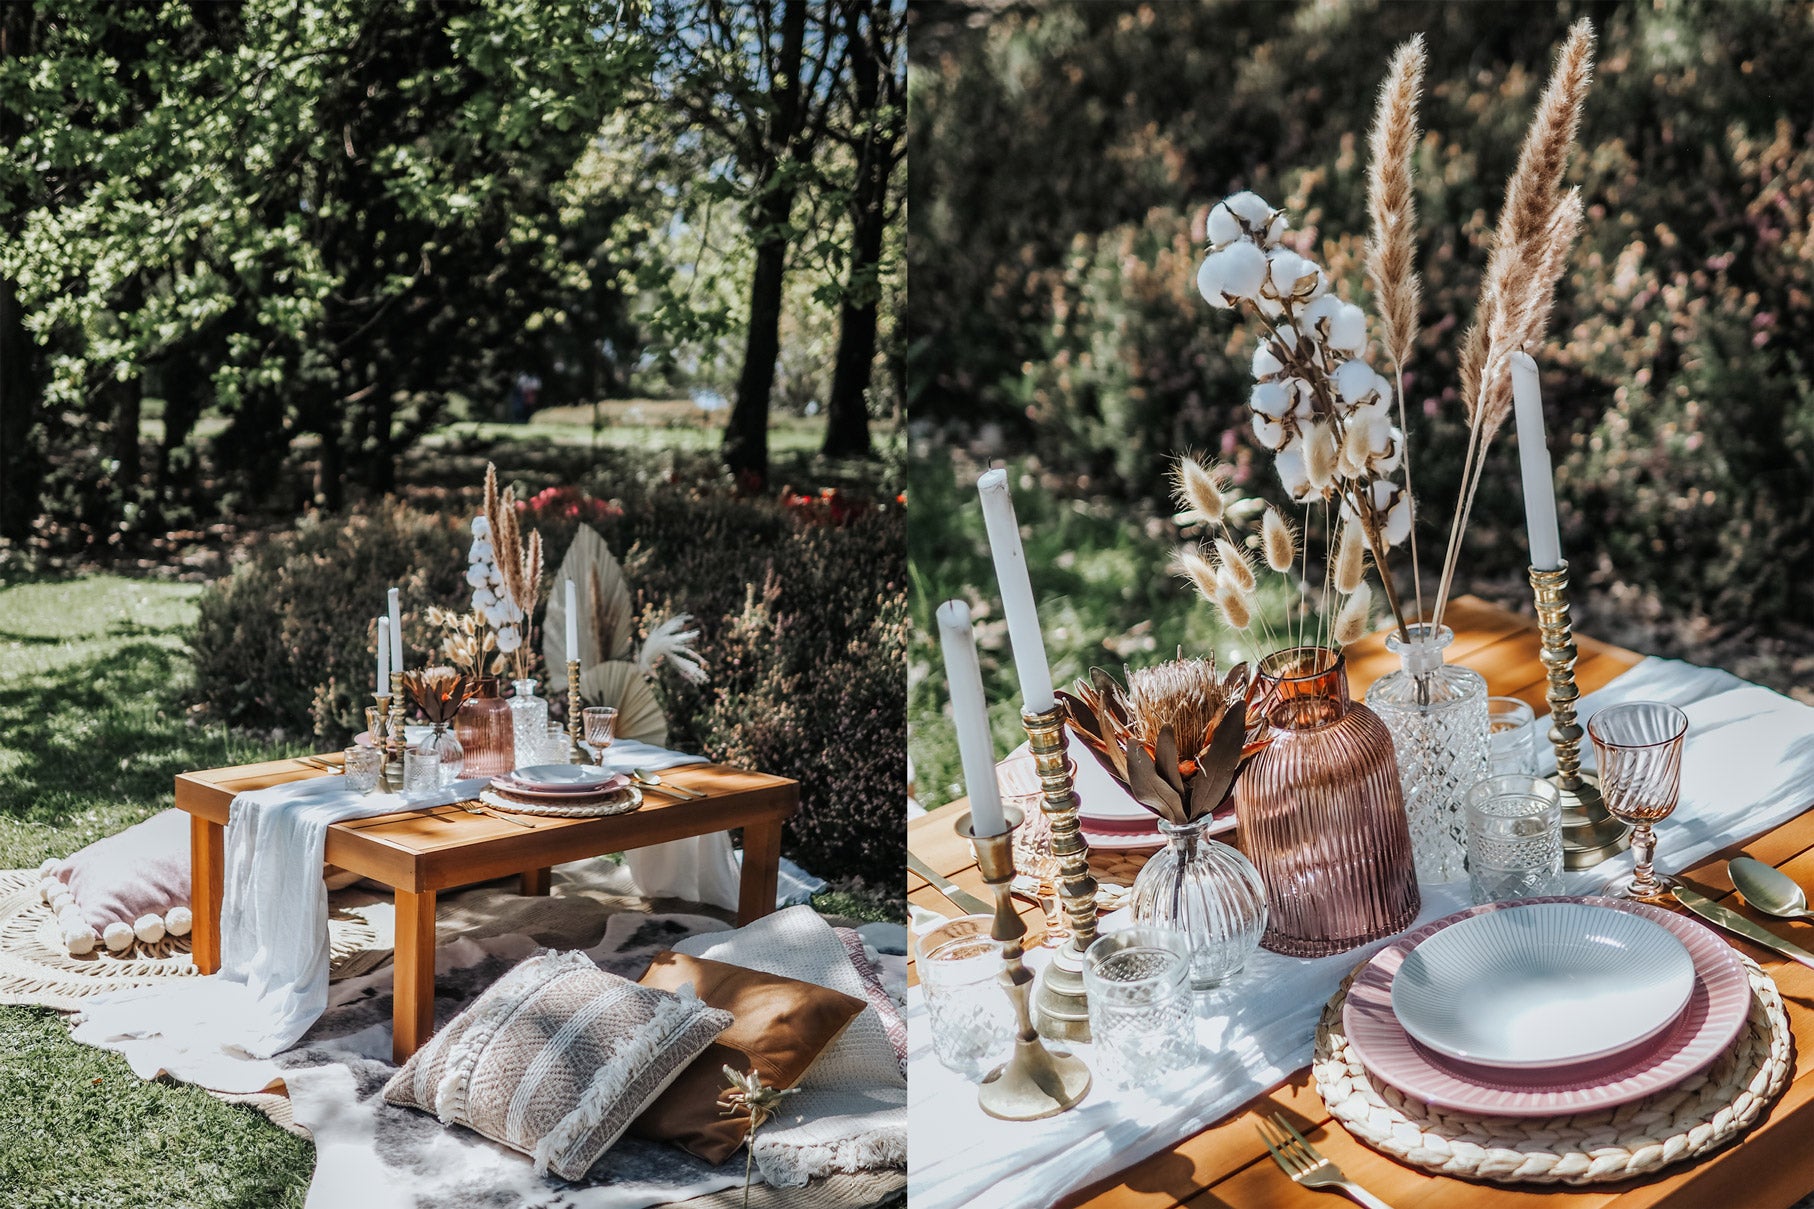 Baby pink surprise picnic proposal in a garden setting